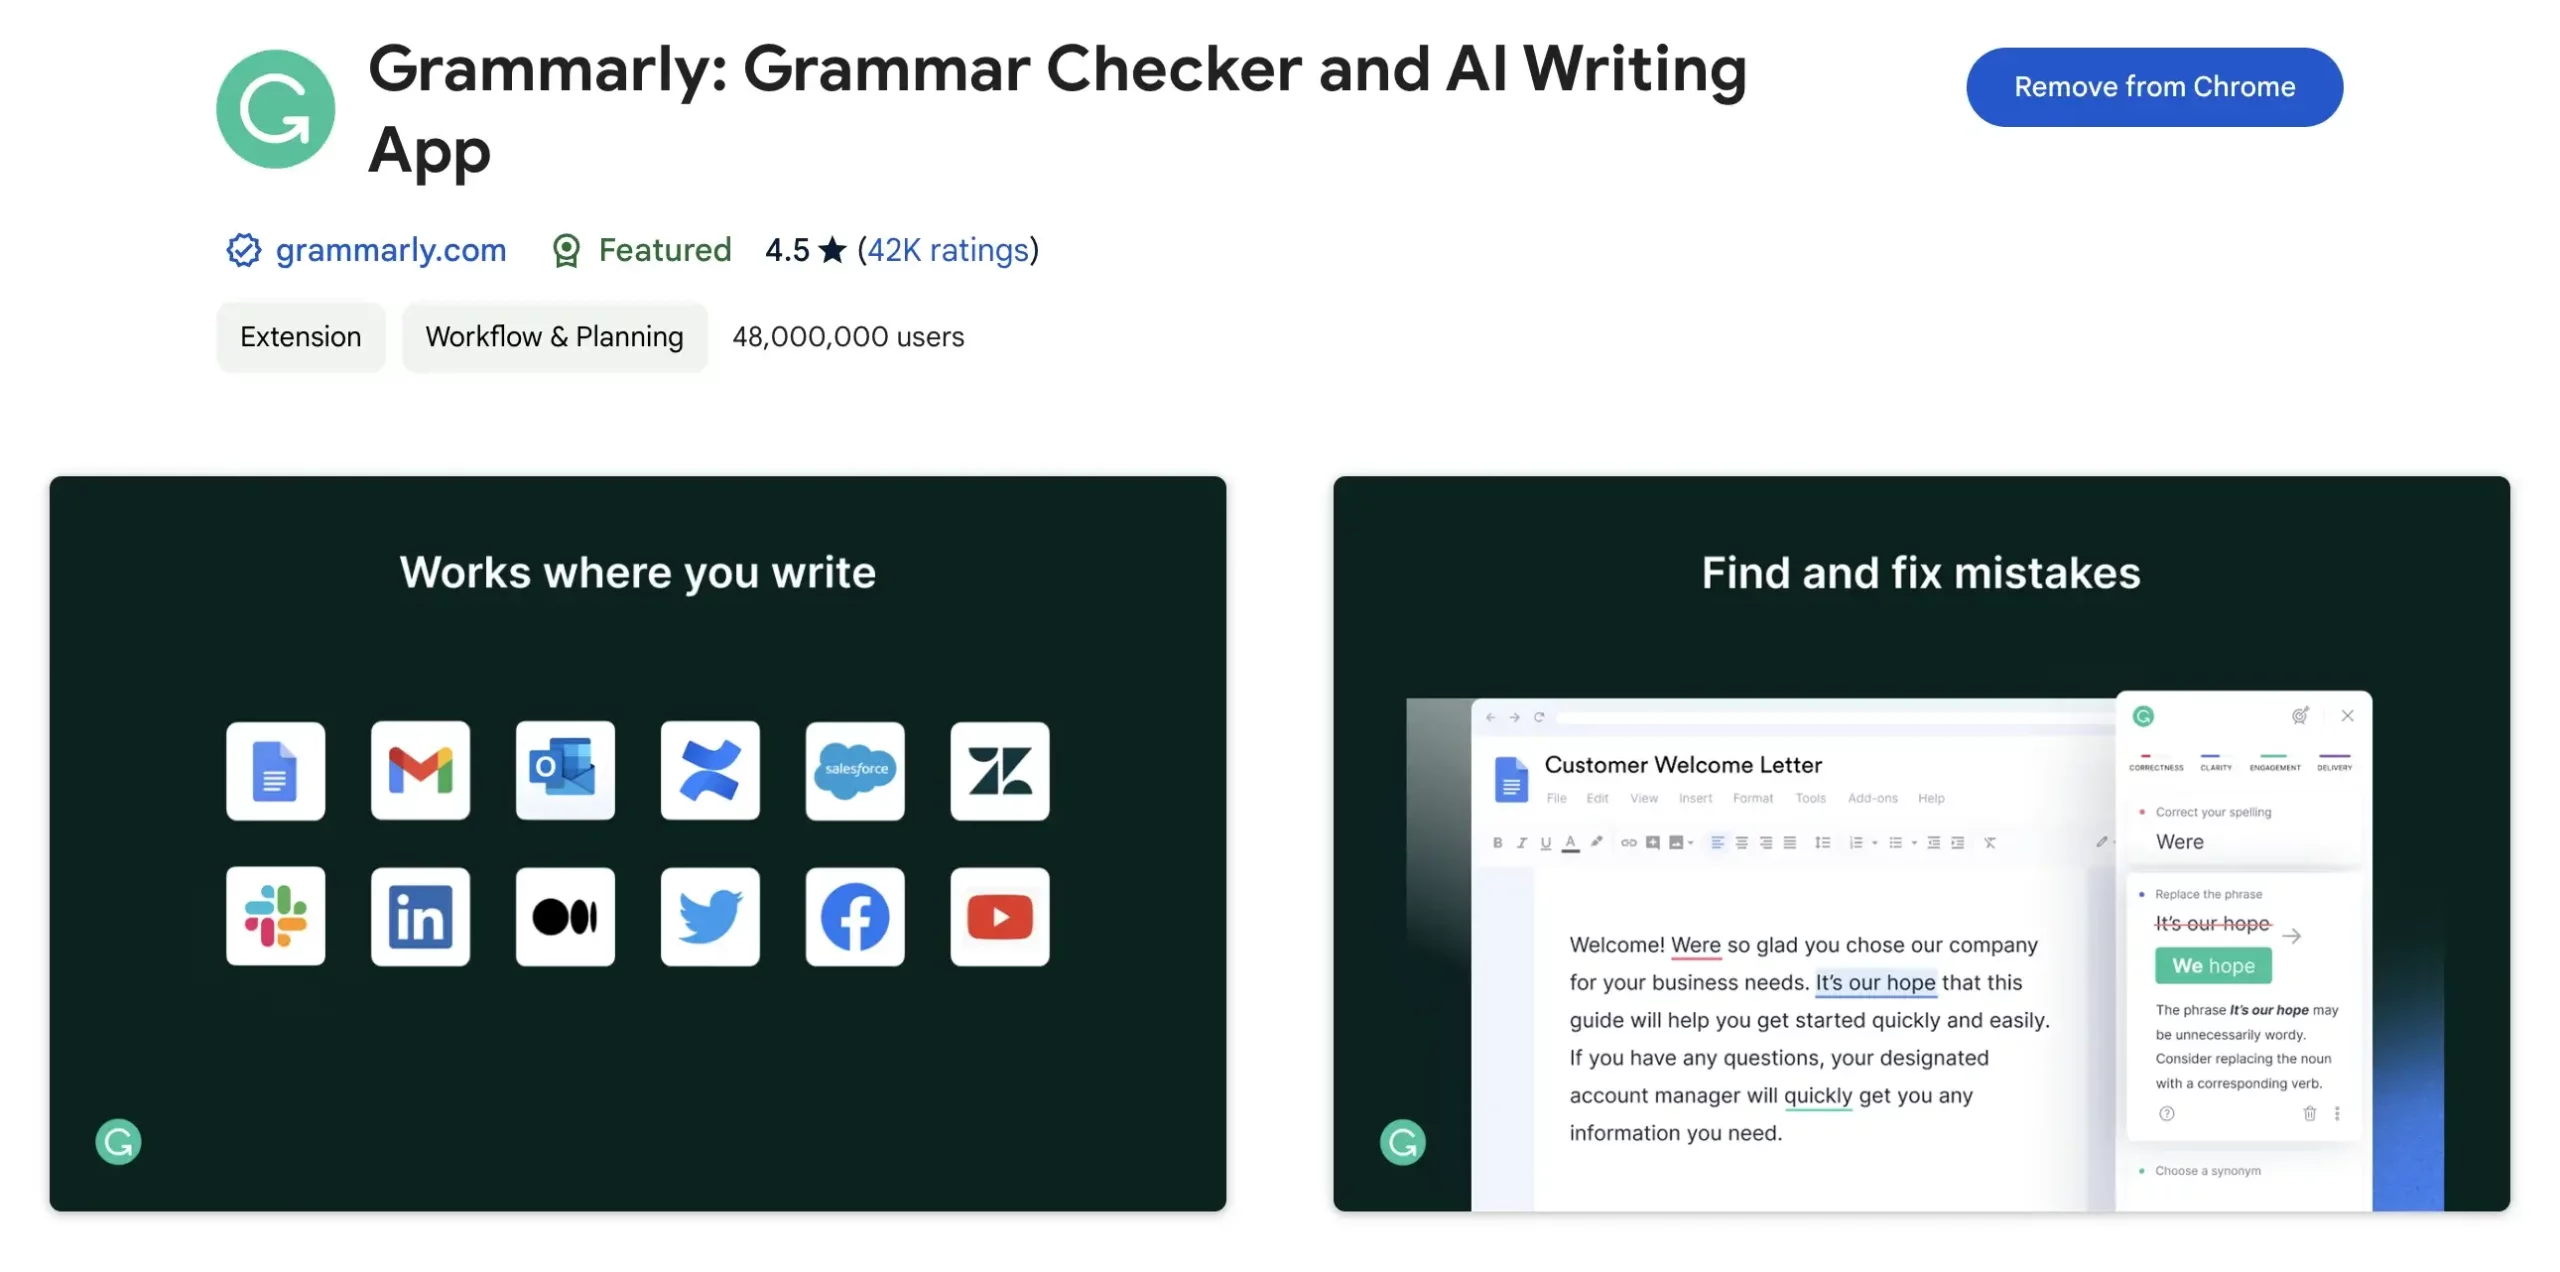 5. Grammarly - Your AI Proofreader